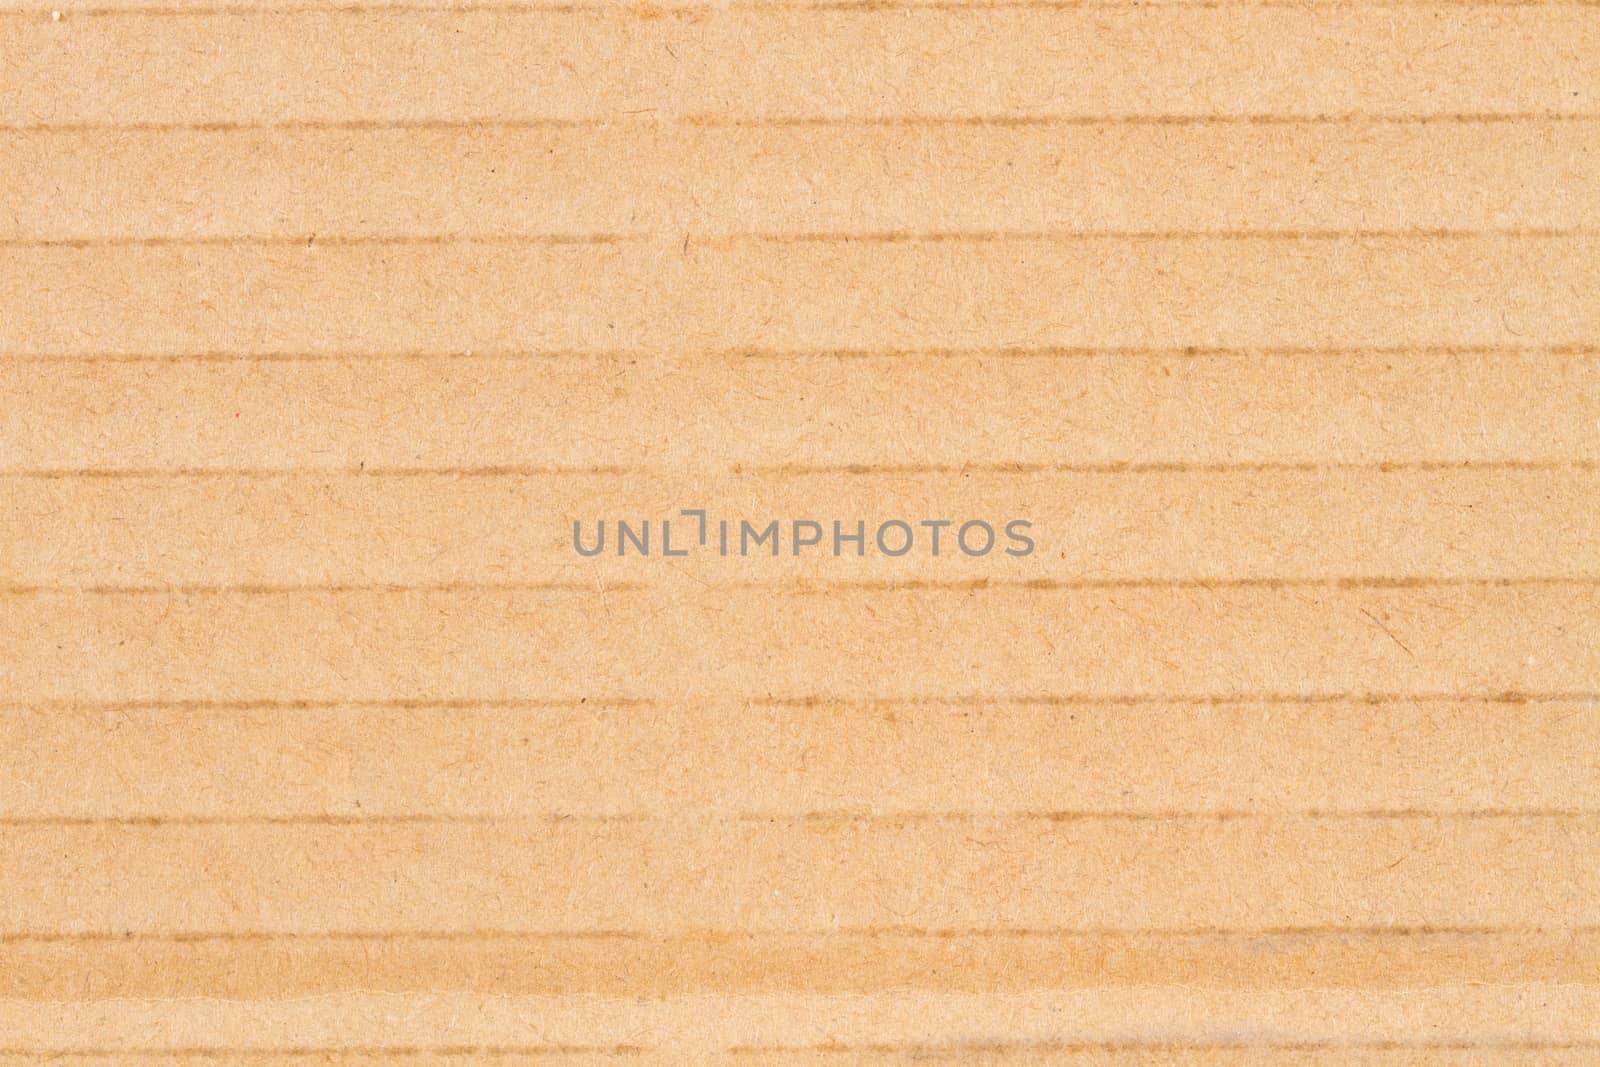 cardboard and carton textures for backgrounds.